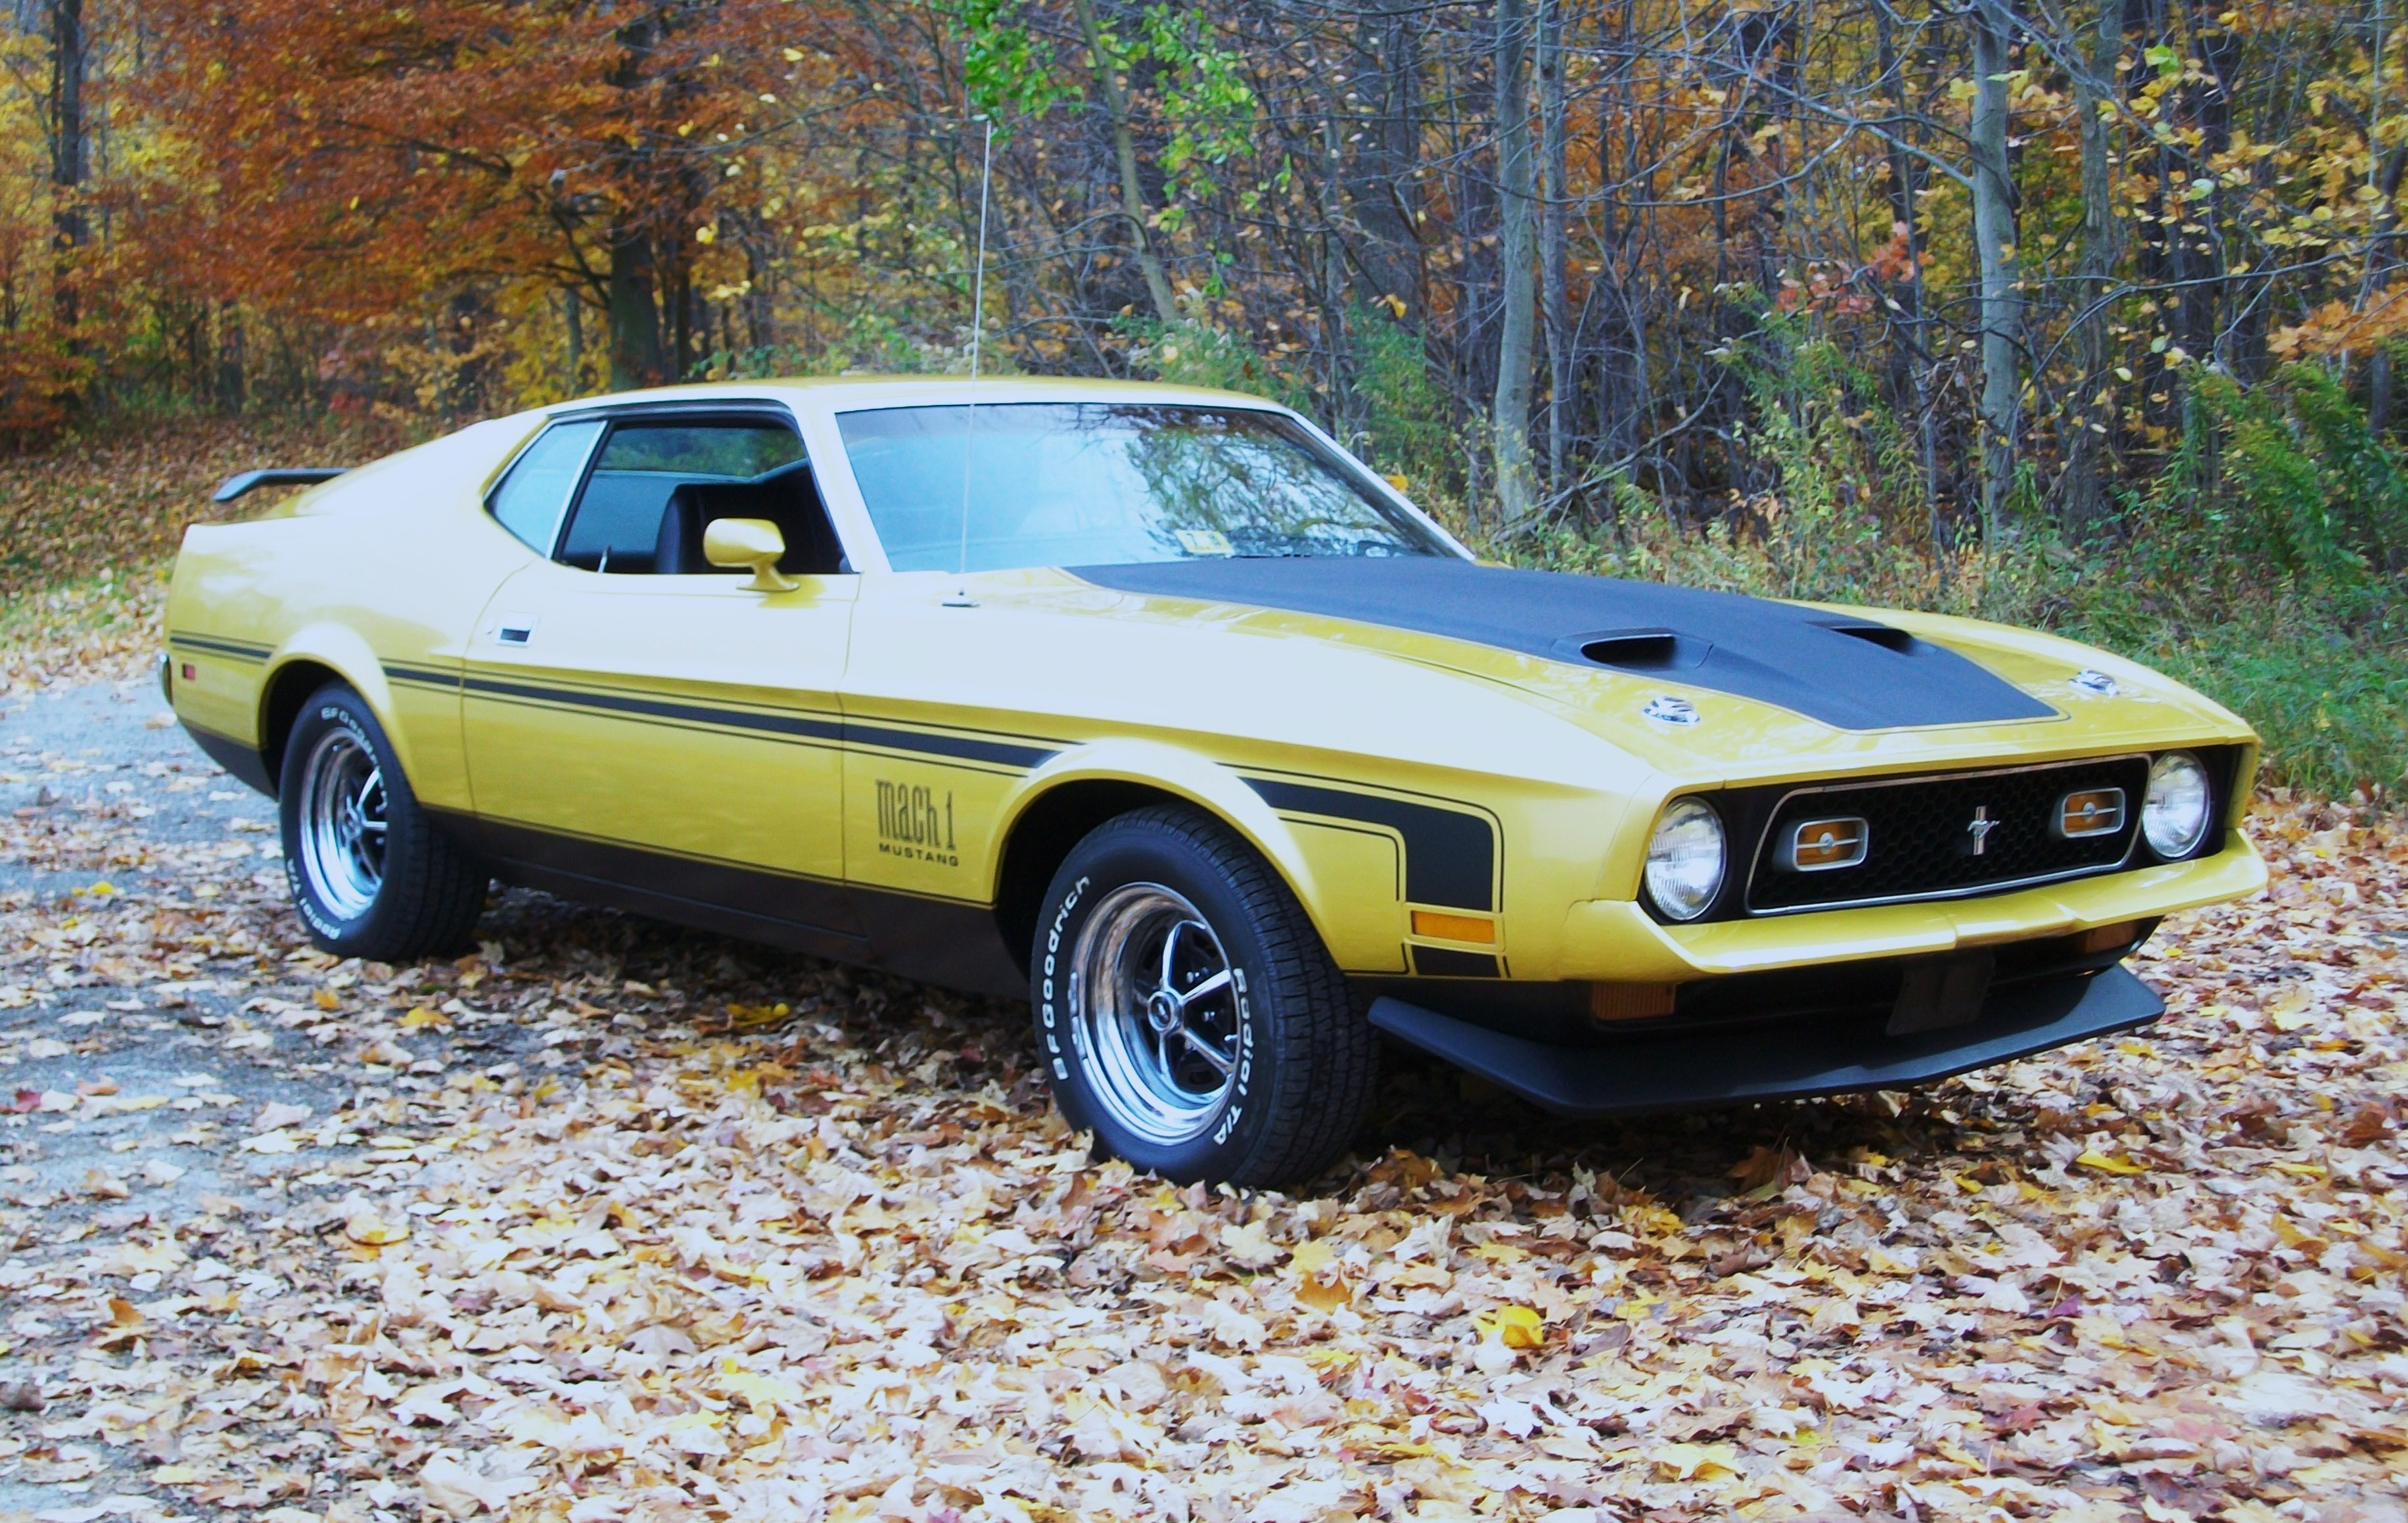 Fastback Ford Mustang Mach 1 Muscle Car Yellow Car 3664x2317